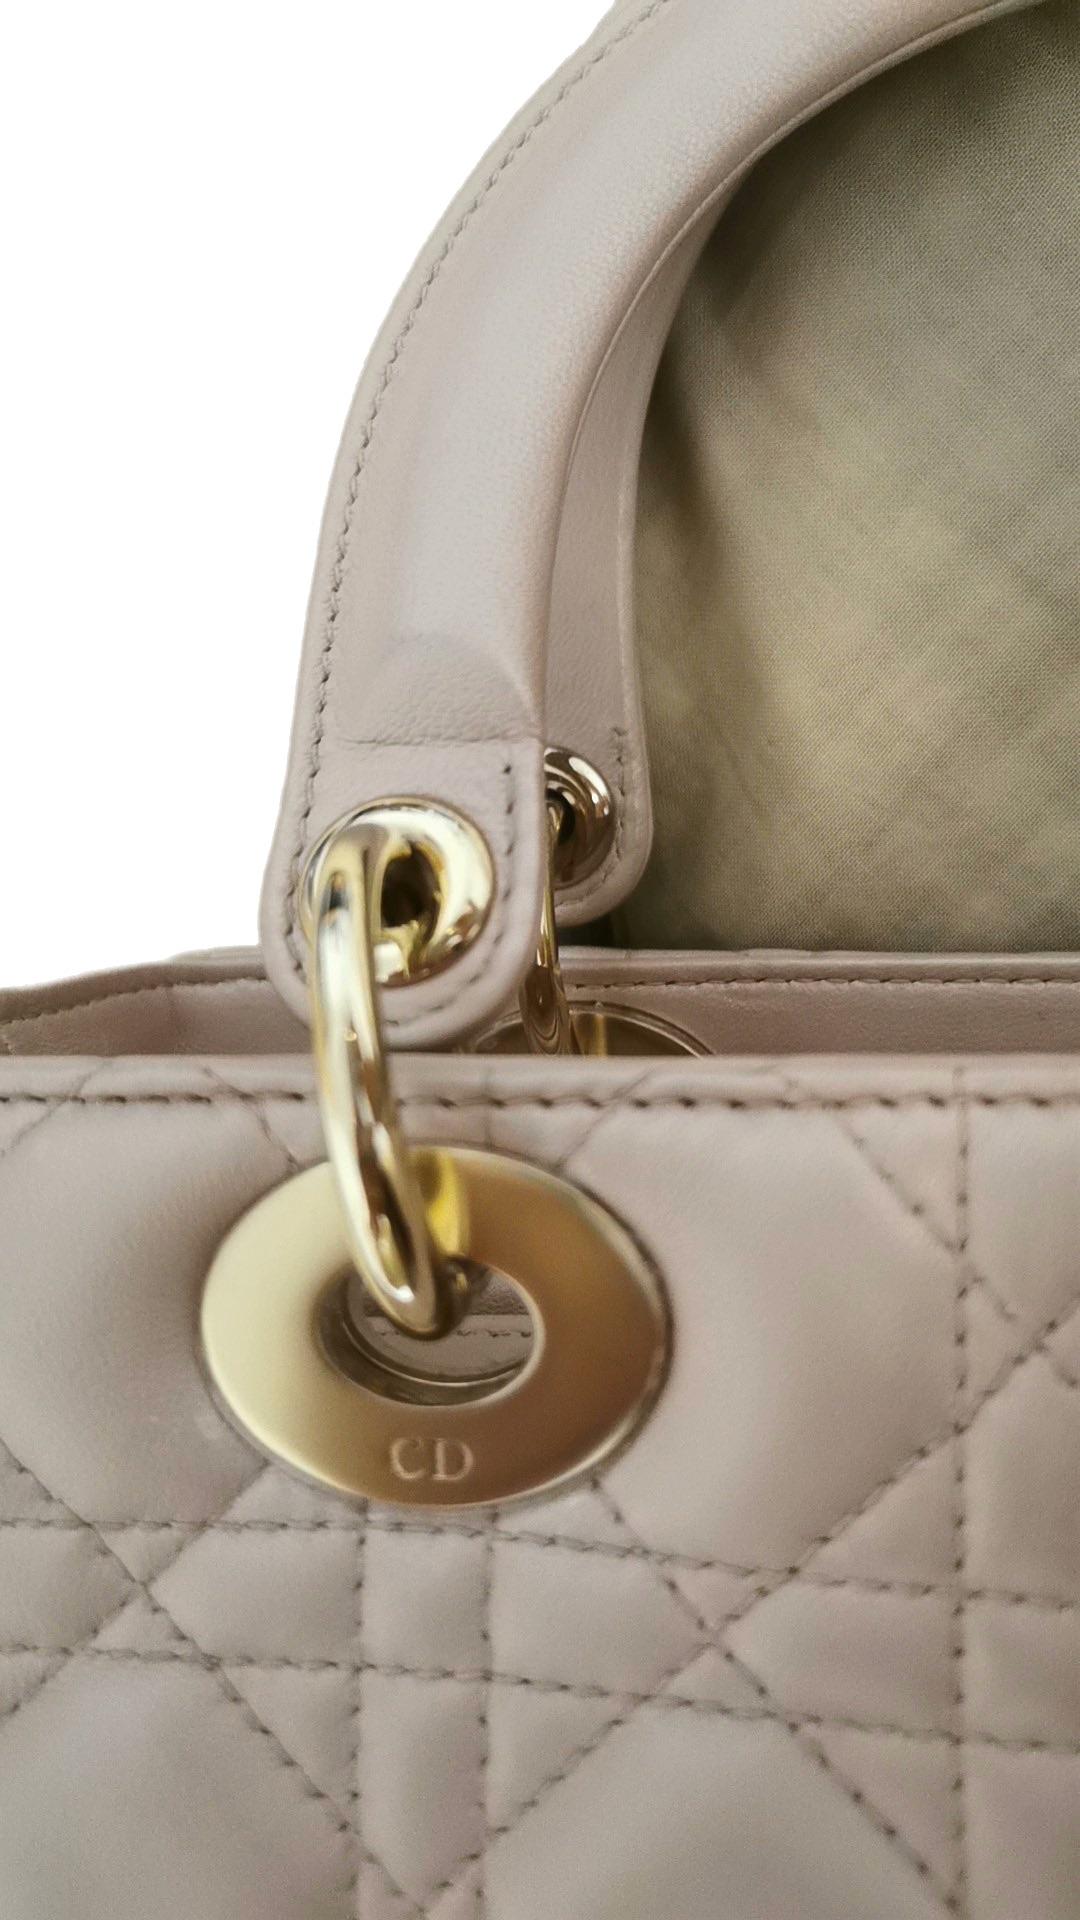 Lady Dior Medium Handbag Pearlescent Pink Cannage Leather Gold Hardware For Sale 5